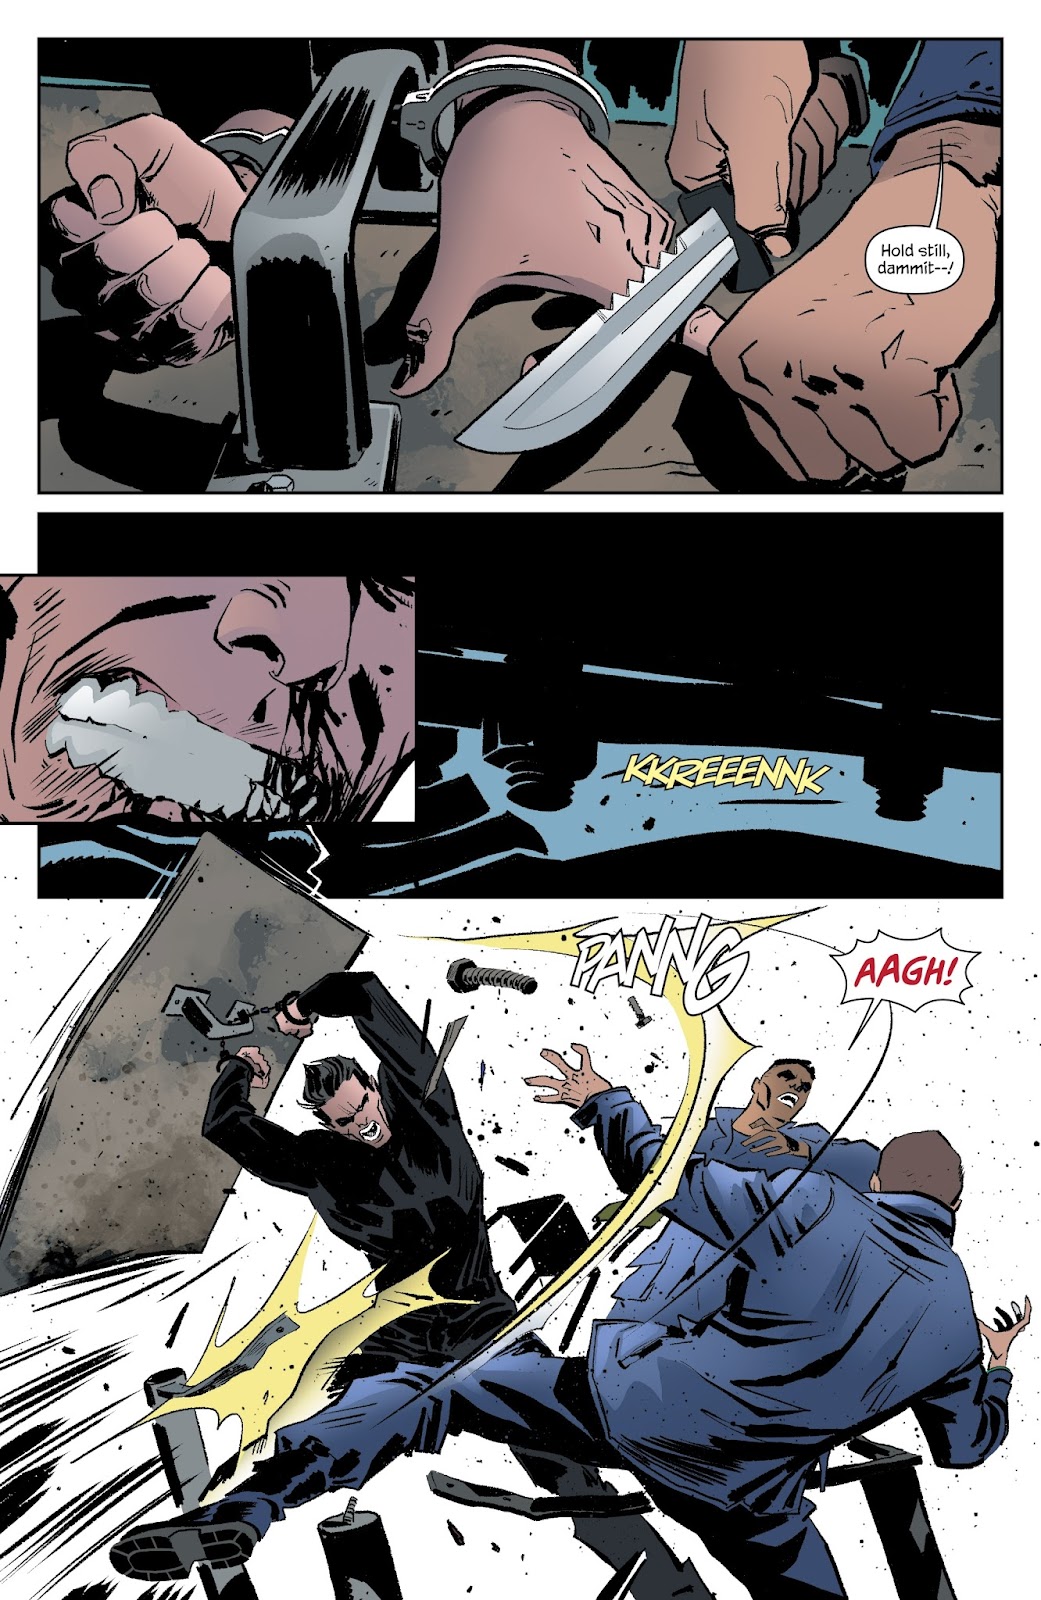 James Bond: Kill Chain issue 5 - Page 18